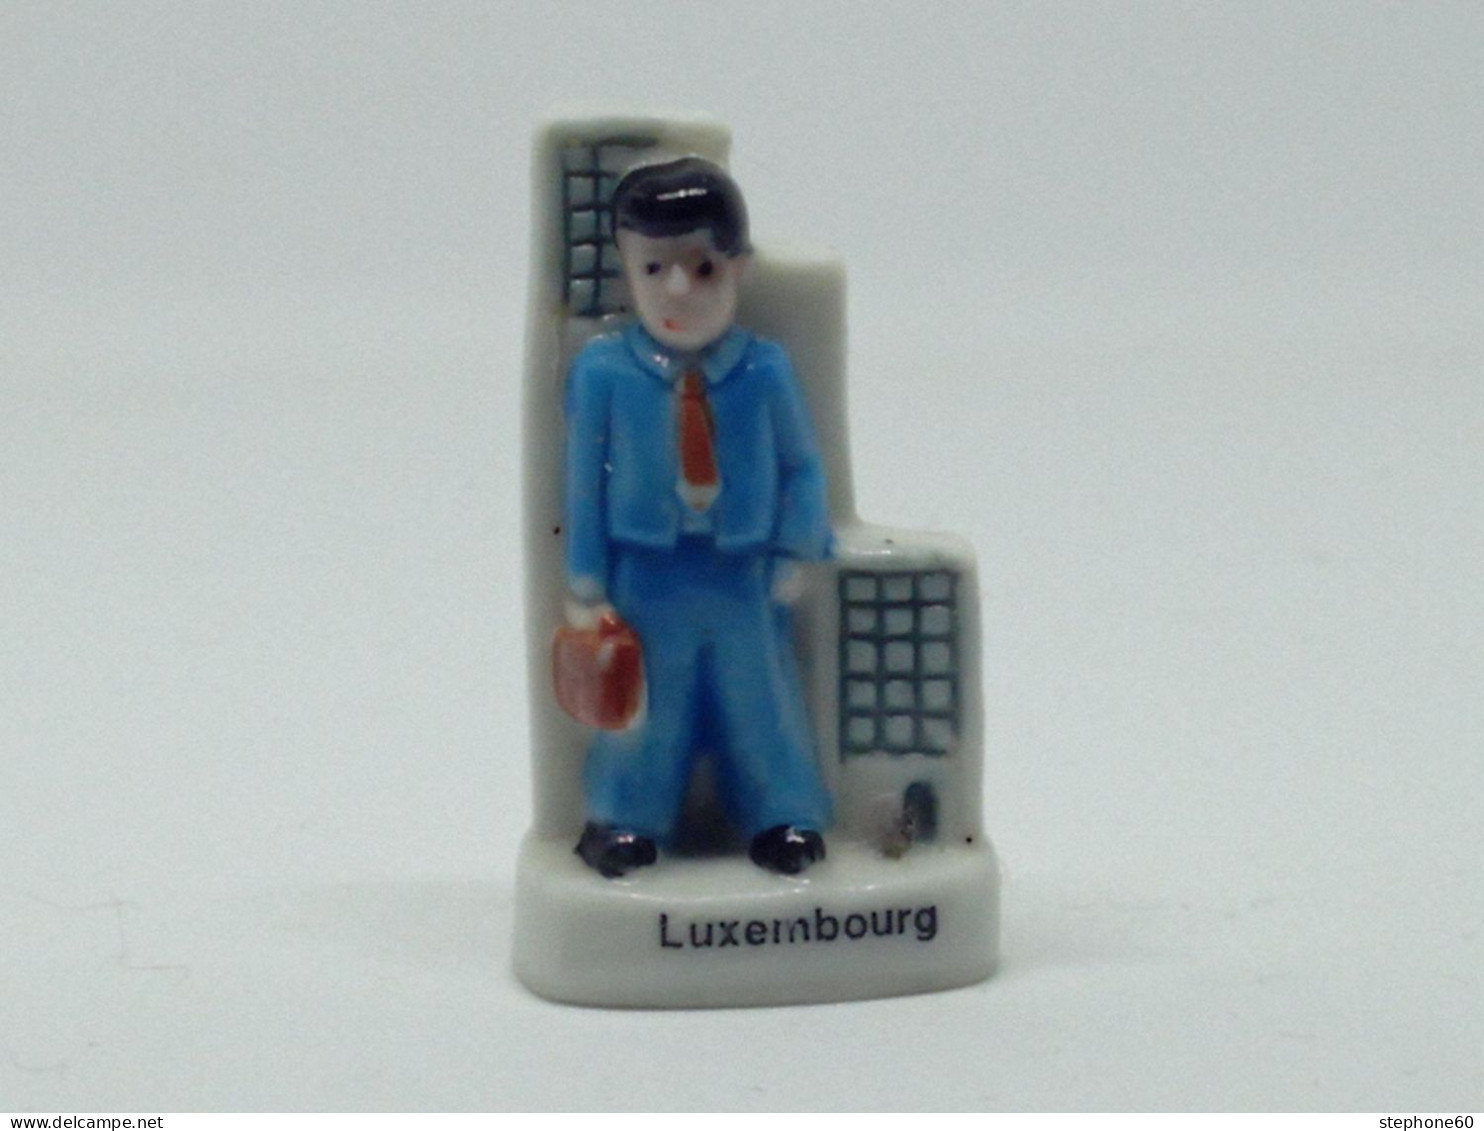 A002 - (21) Feve Pays Luxembourg Personnage - Landen